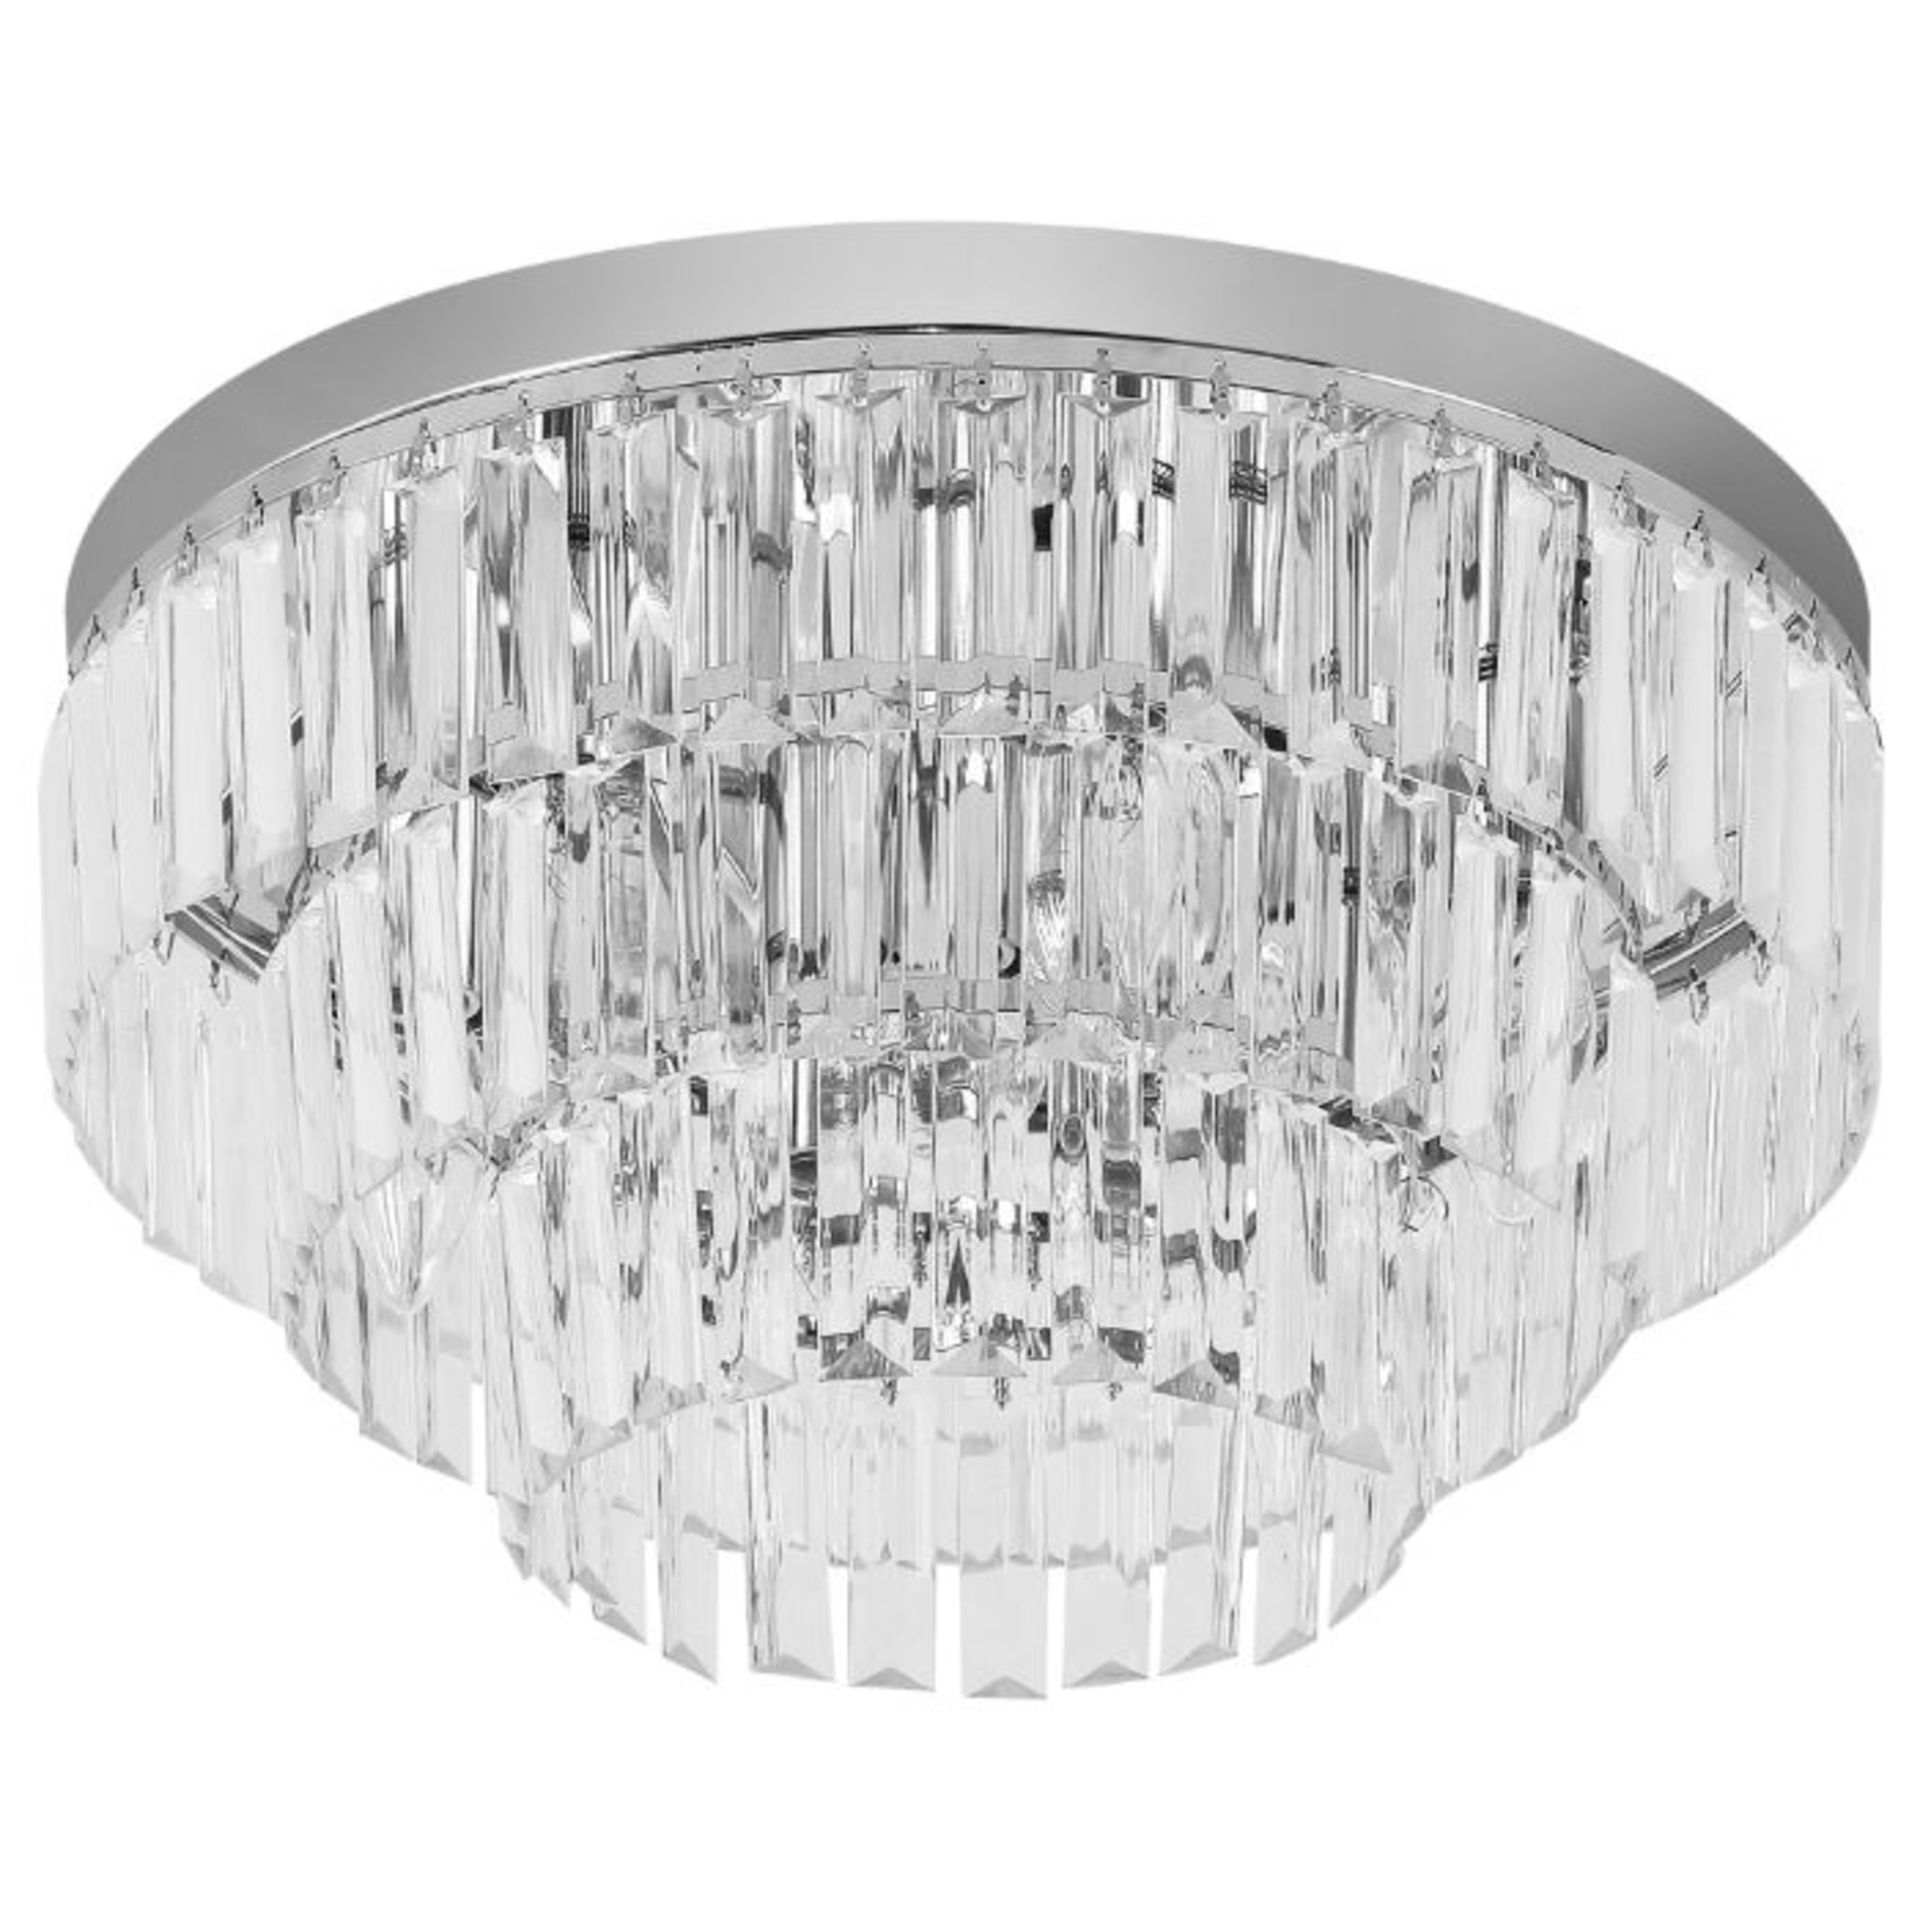 Canora Grey, Round 7 -Light Ceiling Light (CHROME & CRYSTAL FINISH) - RRP £104.99 (GCQQ4914 -